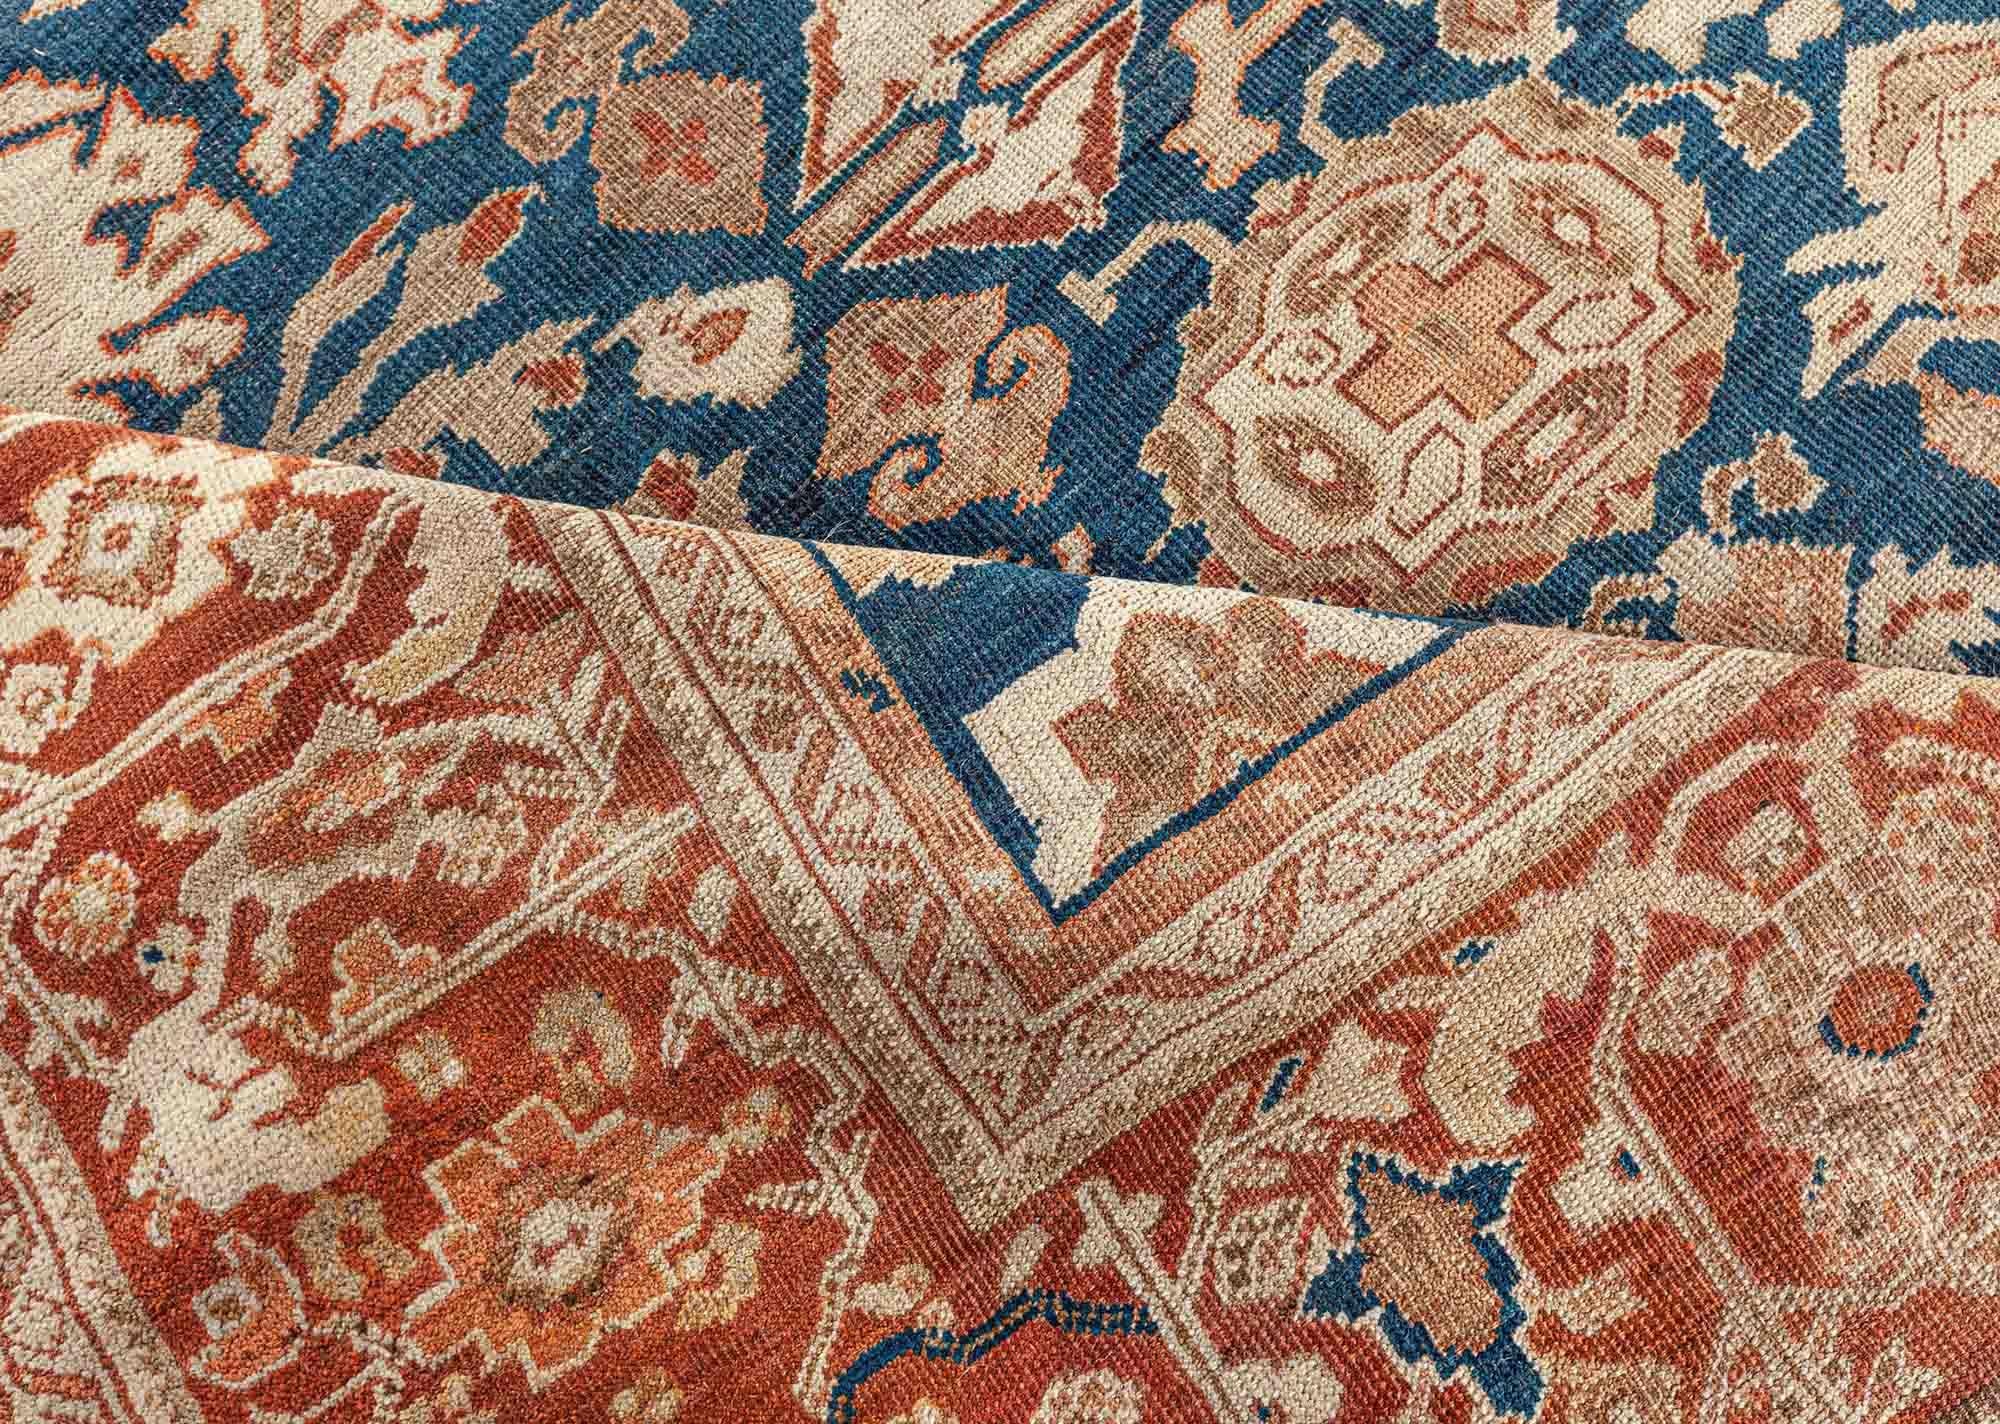 Antique Persian Sultanabad rug
Size: 11'0